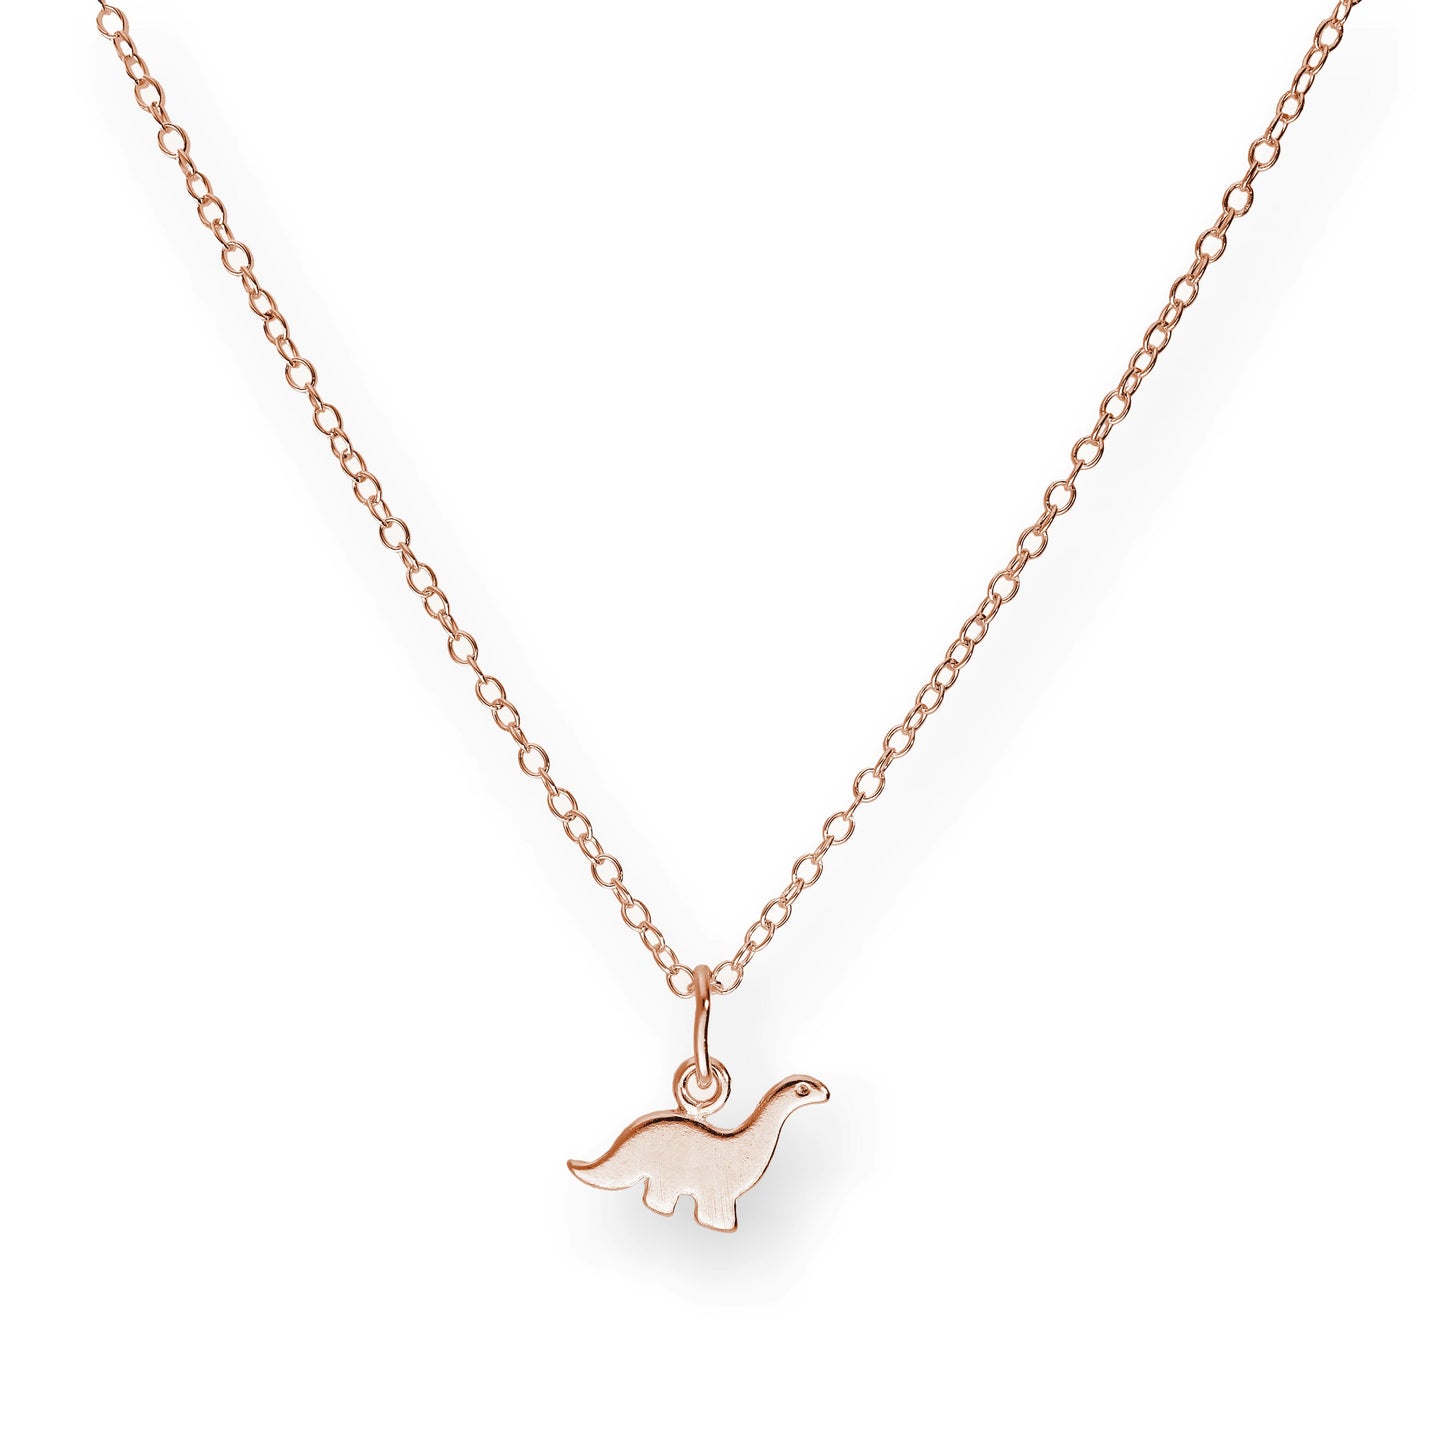 Rose Gold Plated Small Sterling Silver Dinosaur Necklace 18